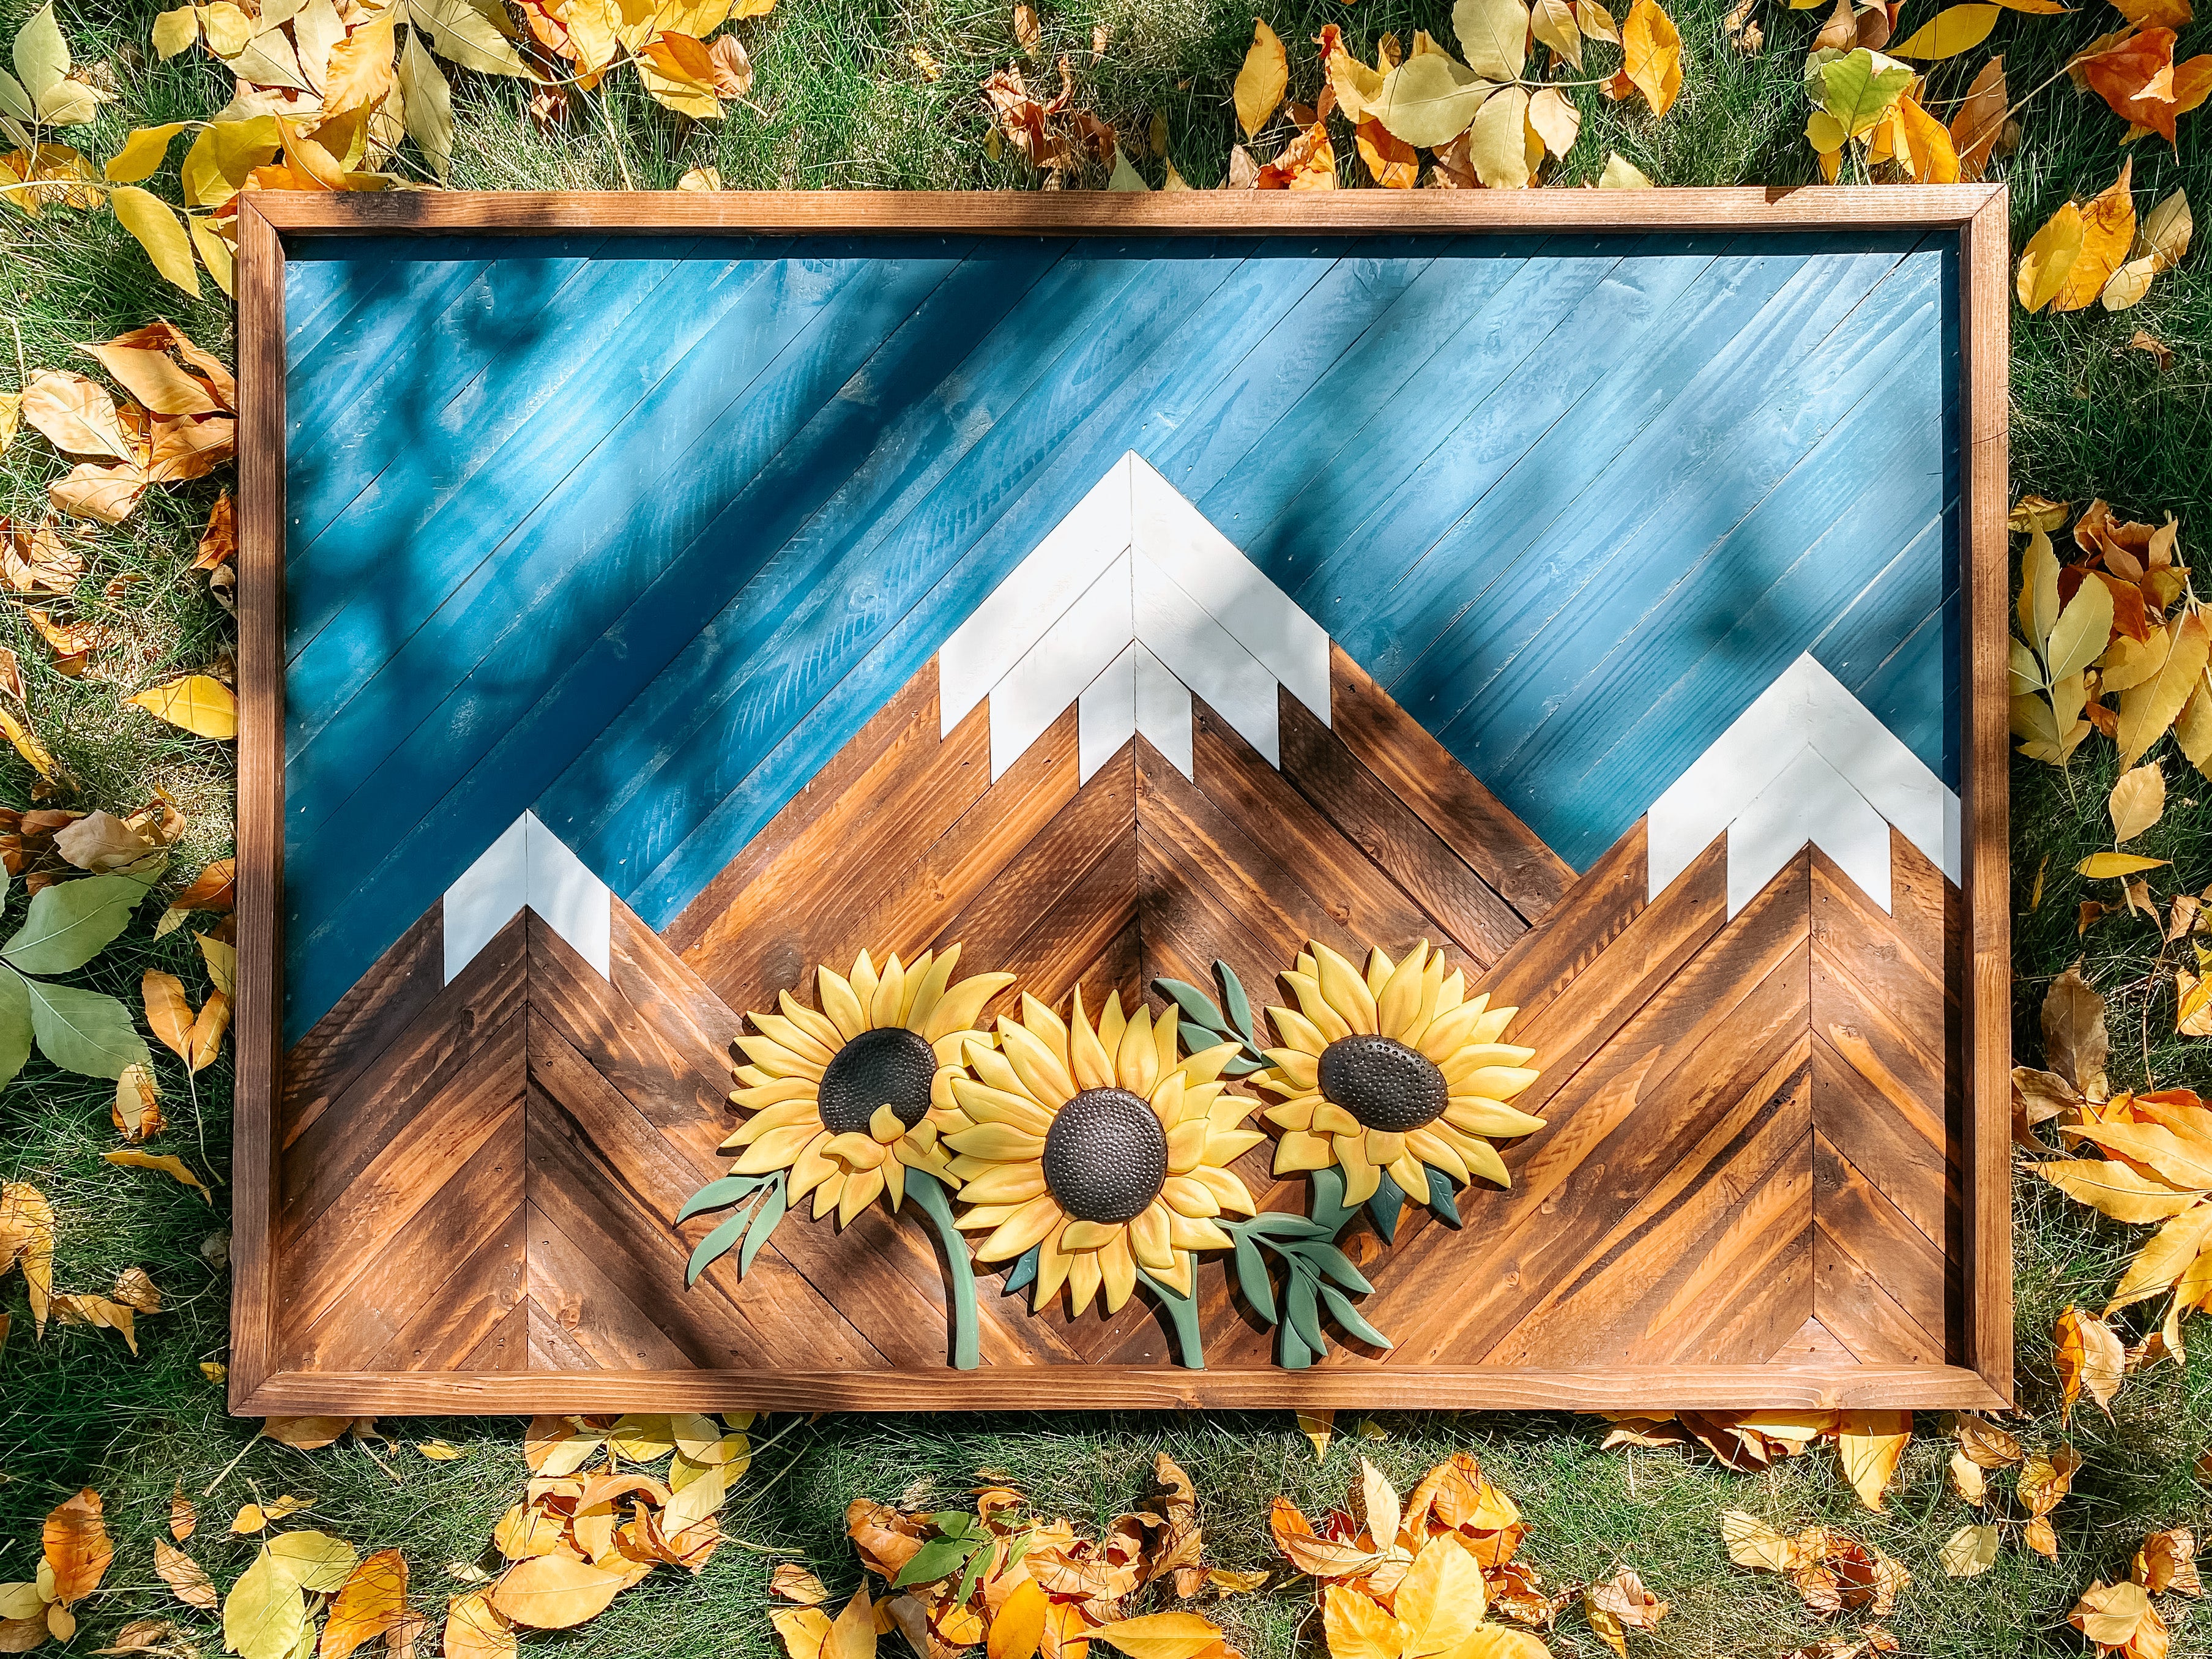 Mountain Mosaic with Sunflowers